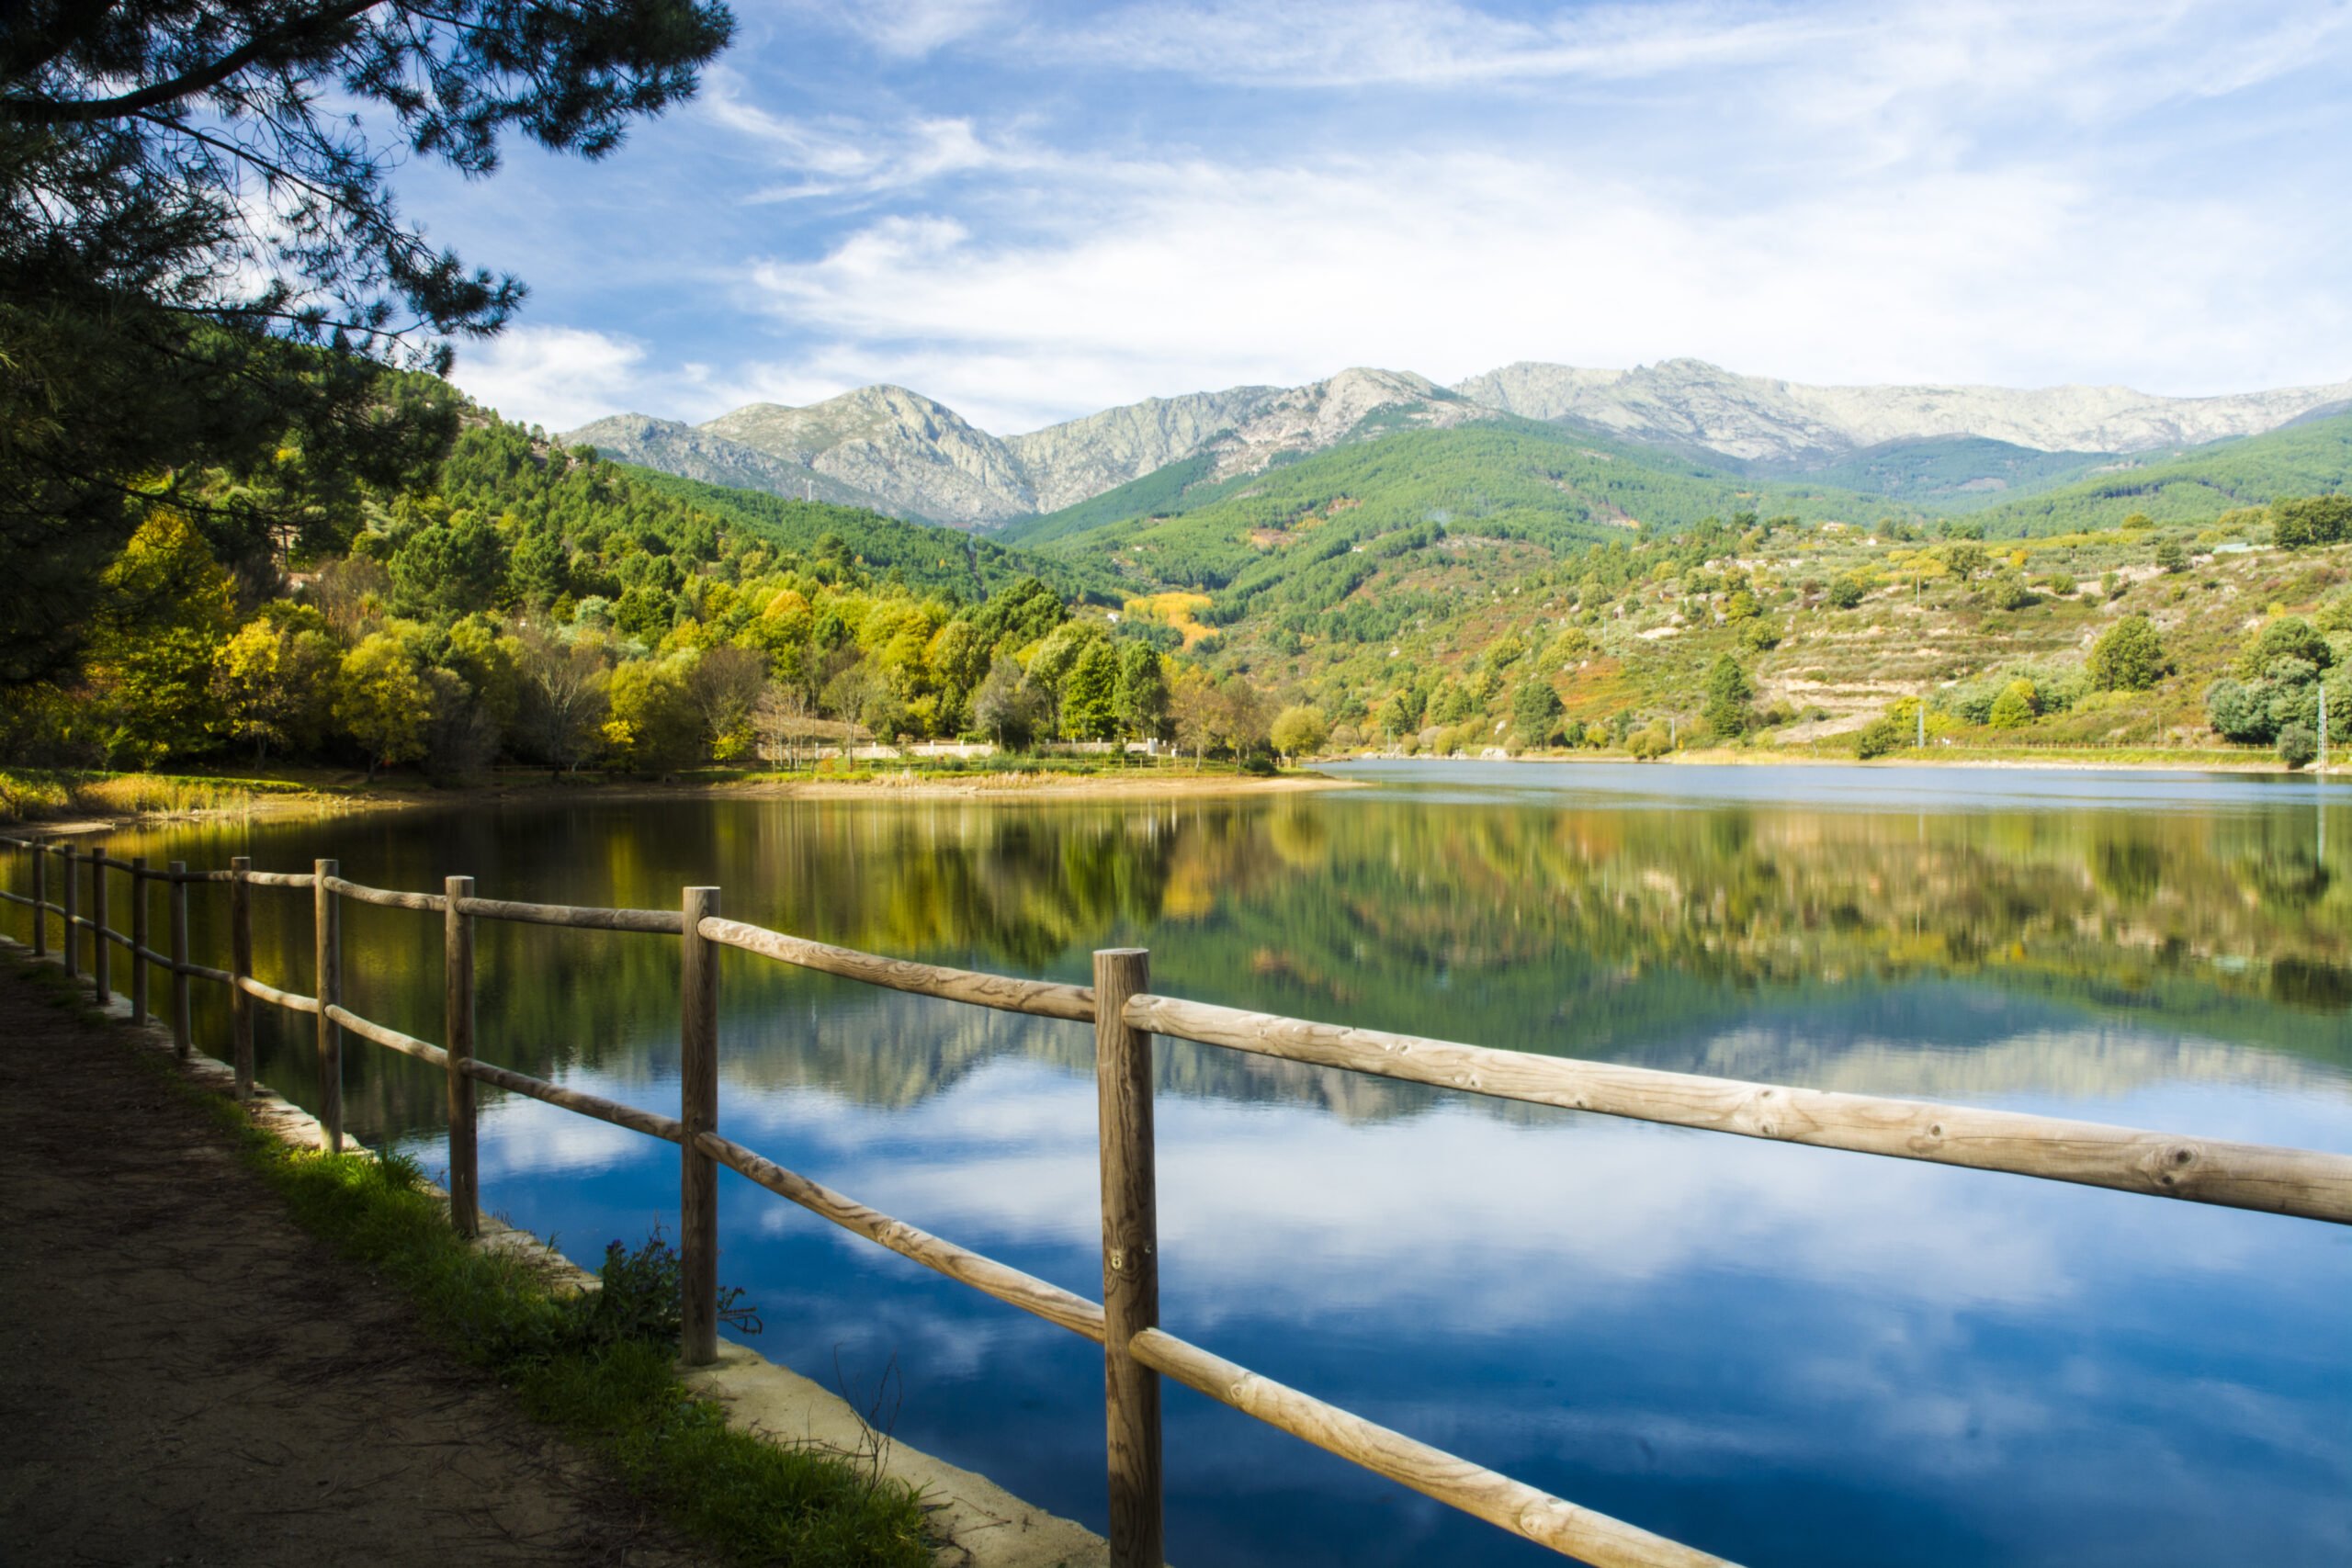 Complete A Challenging 2 Days Hike In Scenic Sierra De Gredos Natural Park In Our 2 Day Hike And Camp In Sierra De Gredos